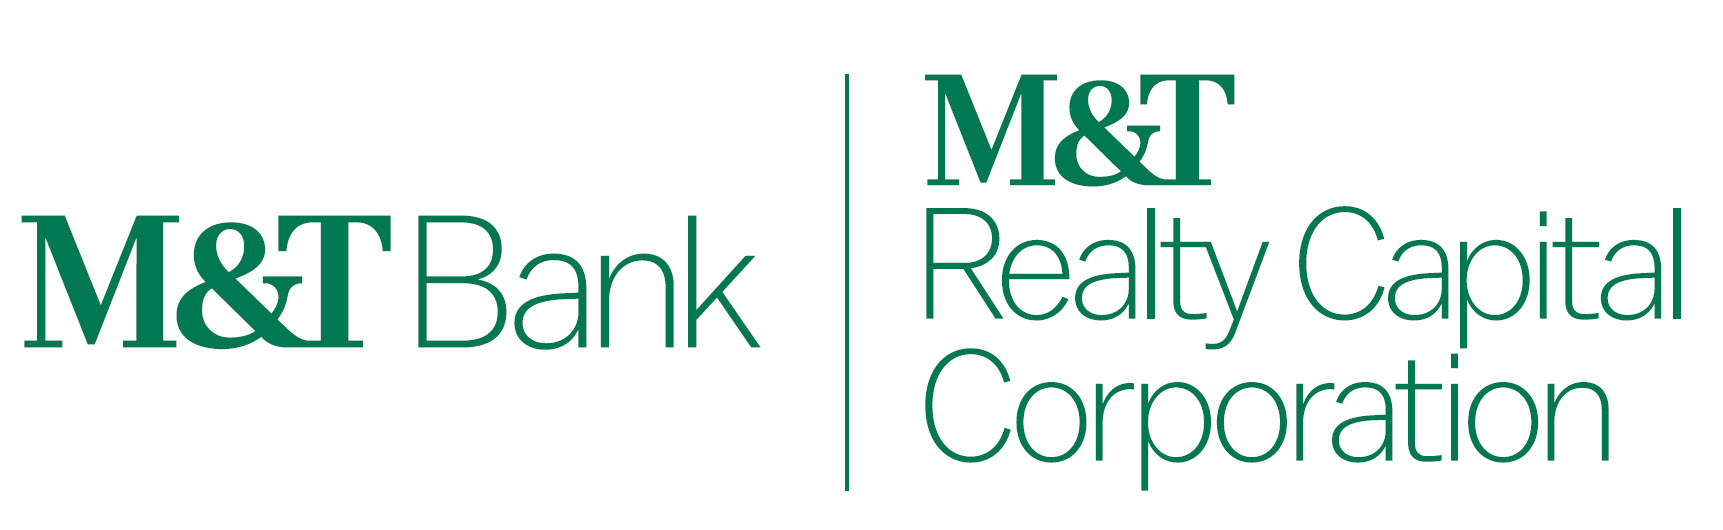 M&T Bank | M&T Realty Capital Corp.